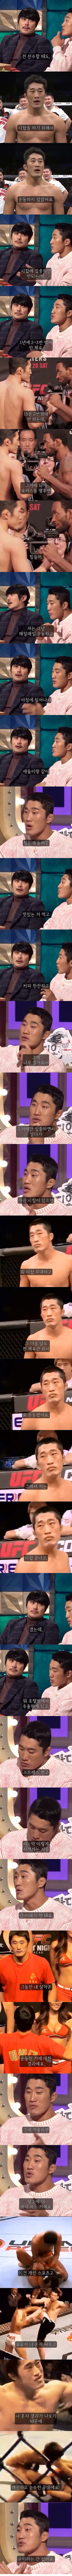 The reason why Kim Dong-hyun did not focus on the match